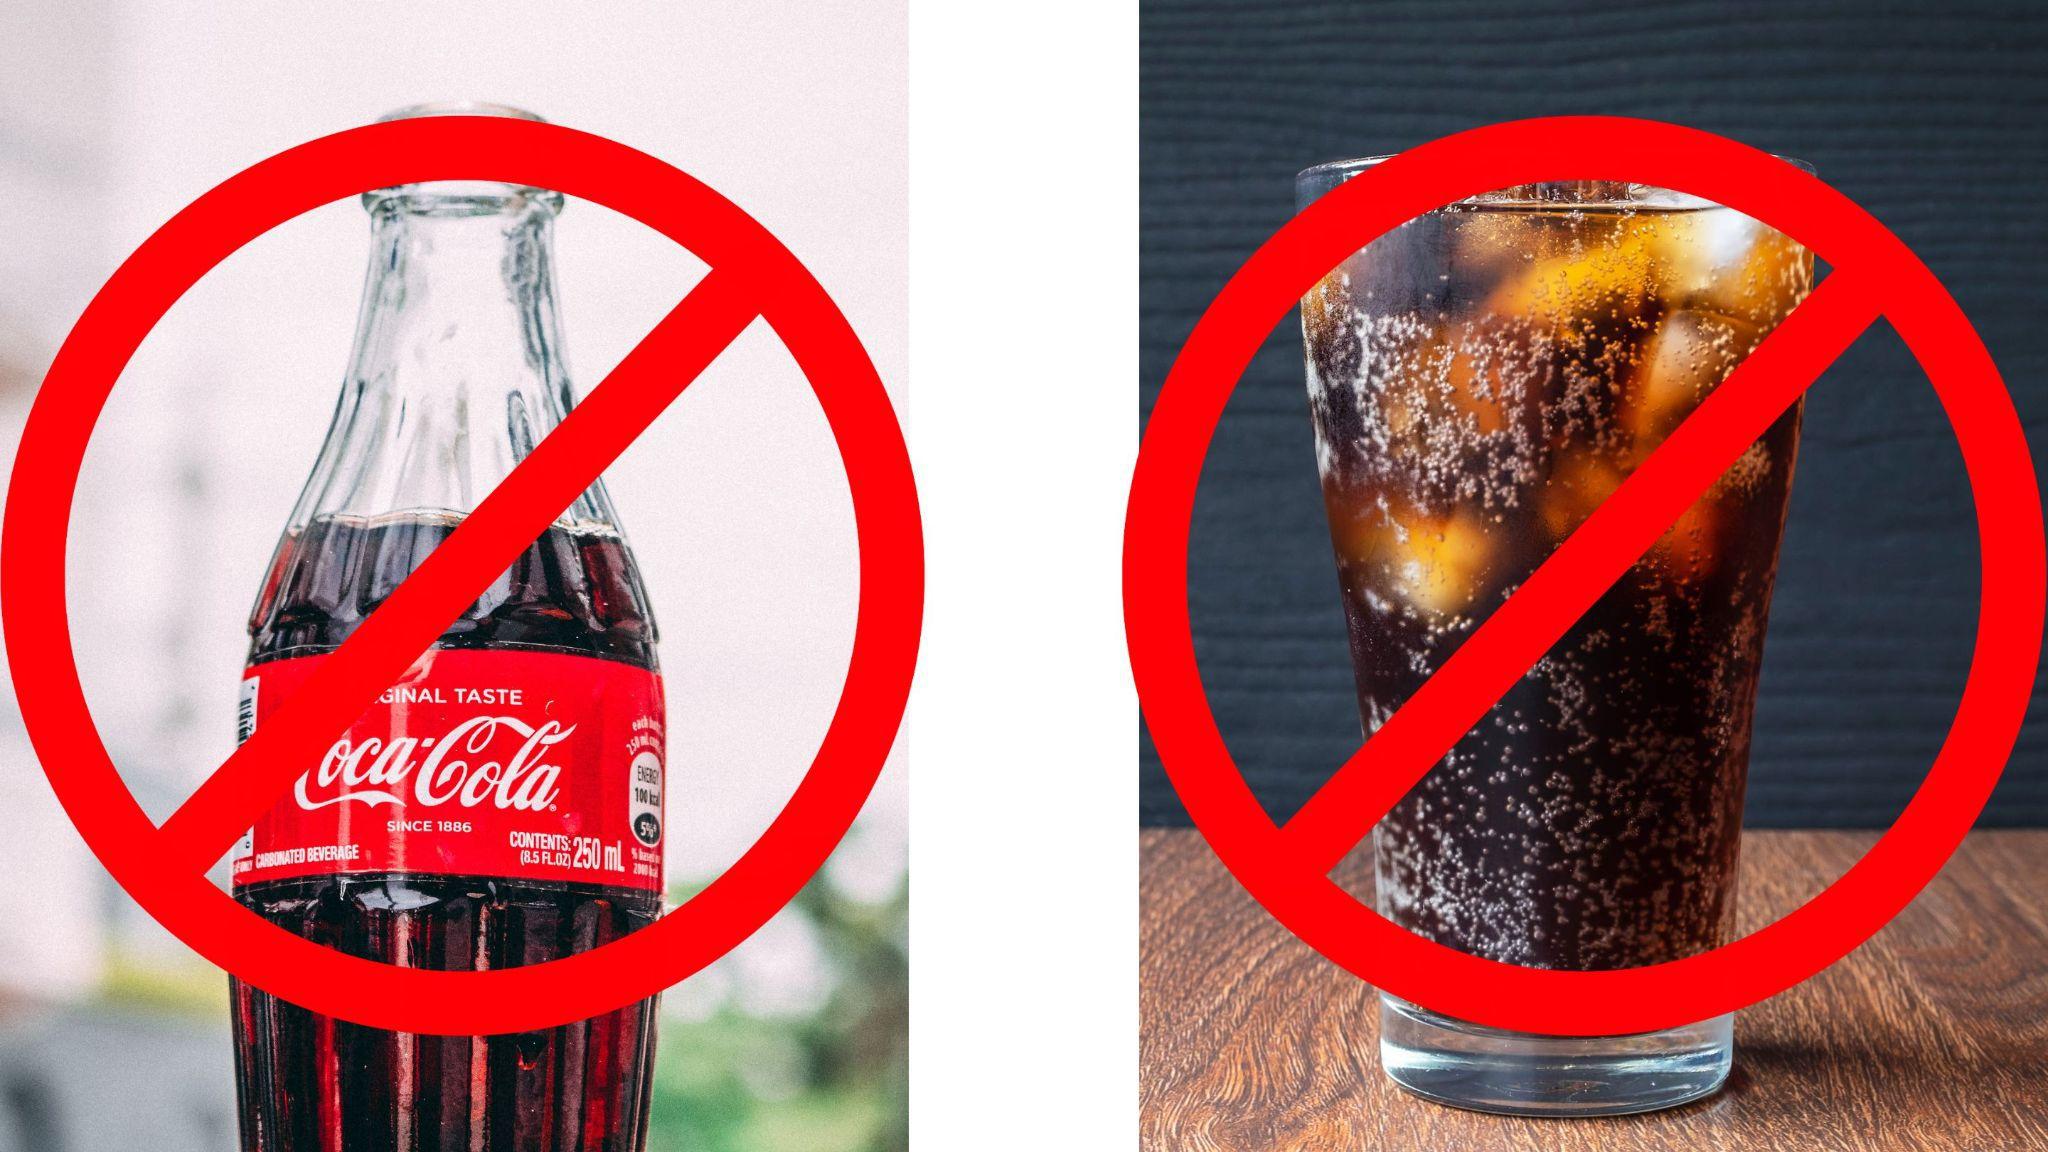 Regular soda (left) is compared to diet (right). Both have “No” signs on them.